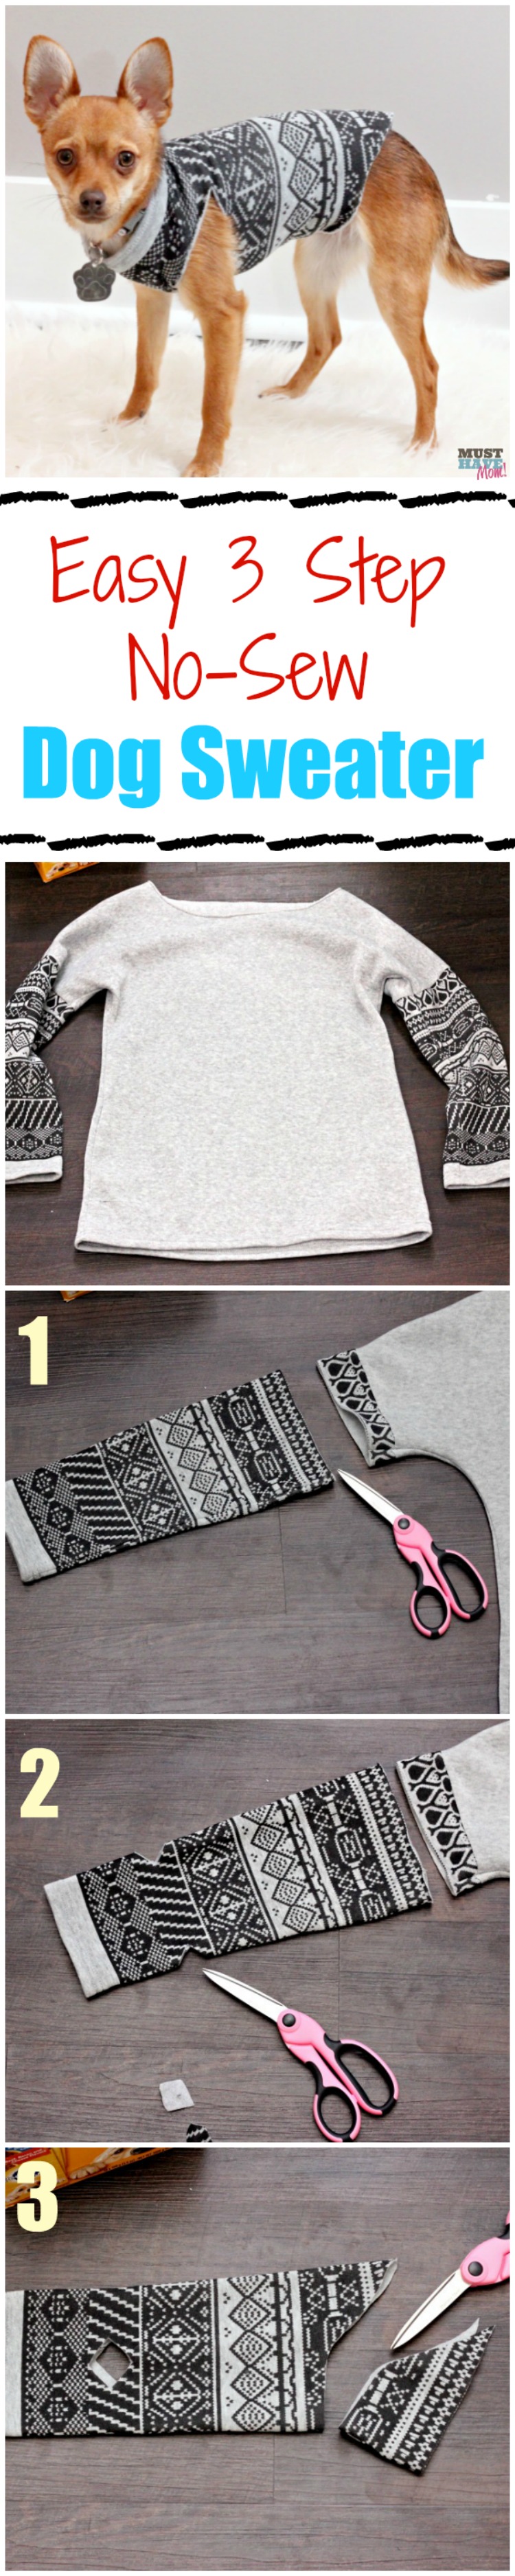 Easy, 3 step dog sweater DIY! No sew DIY dog sweater made from a sweatshirt or sweater! 3 easy steps!